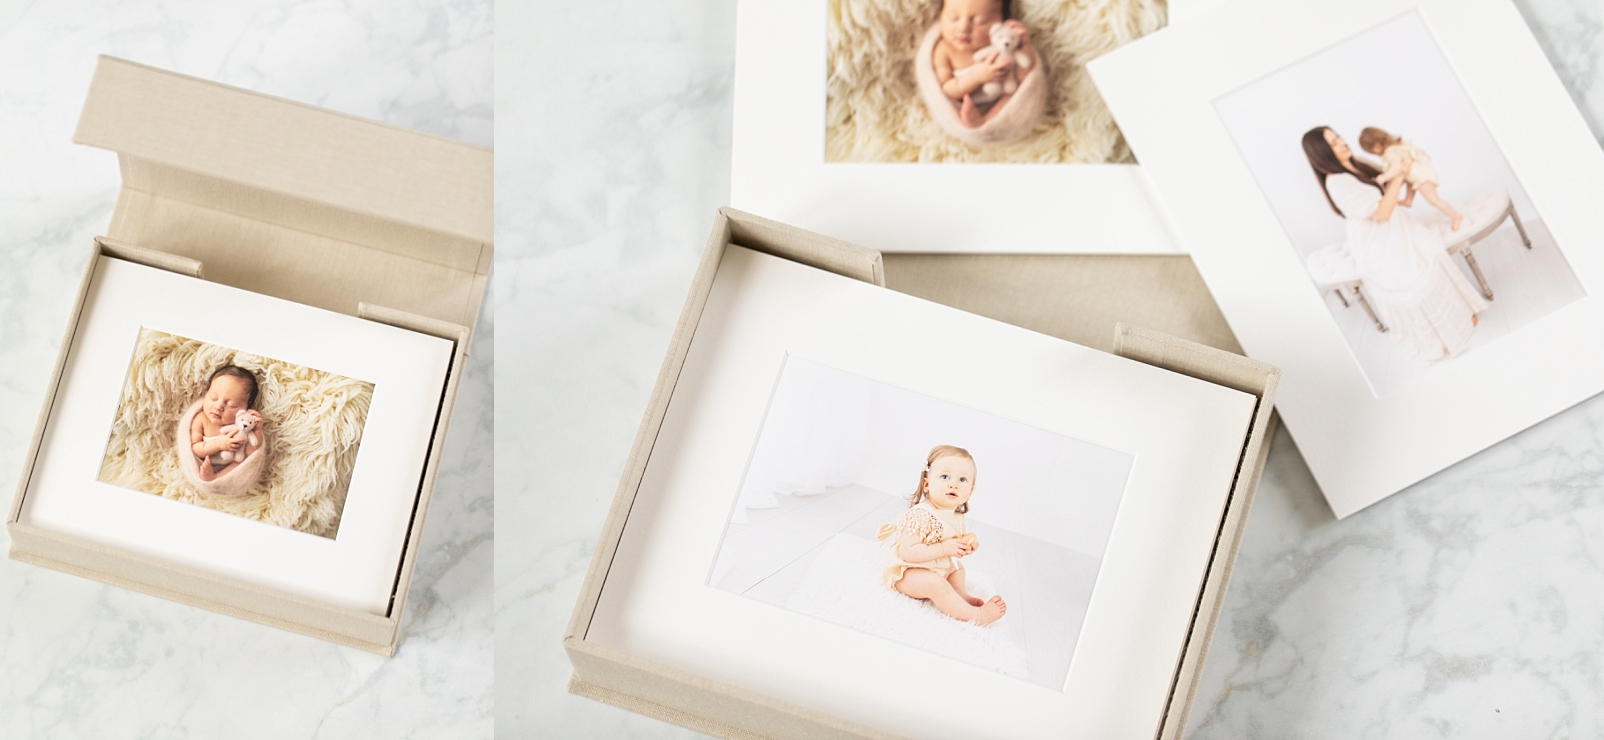 matted print box showcasing photos of a newborn and 1st birthday portraits